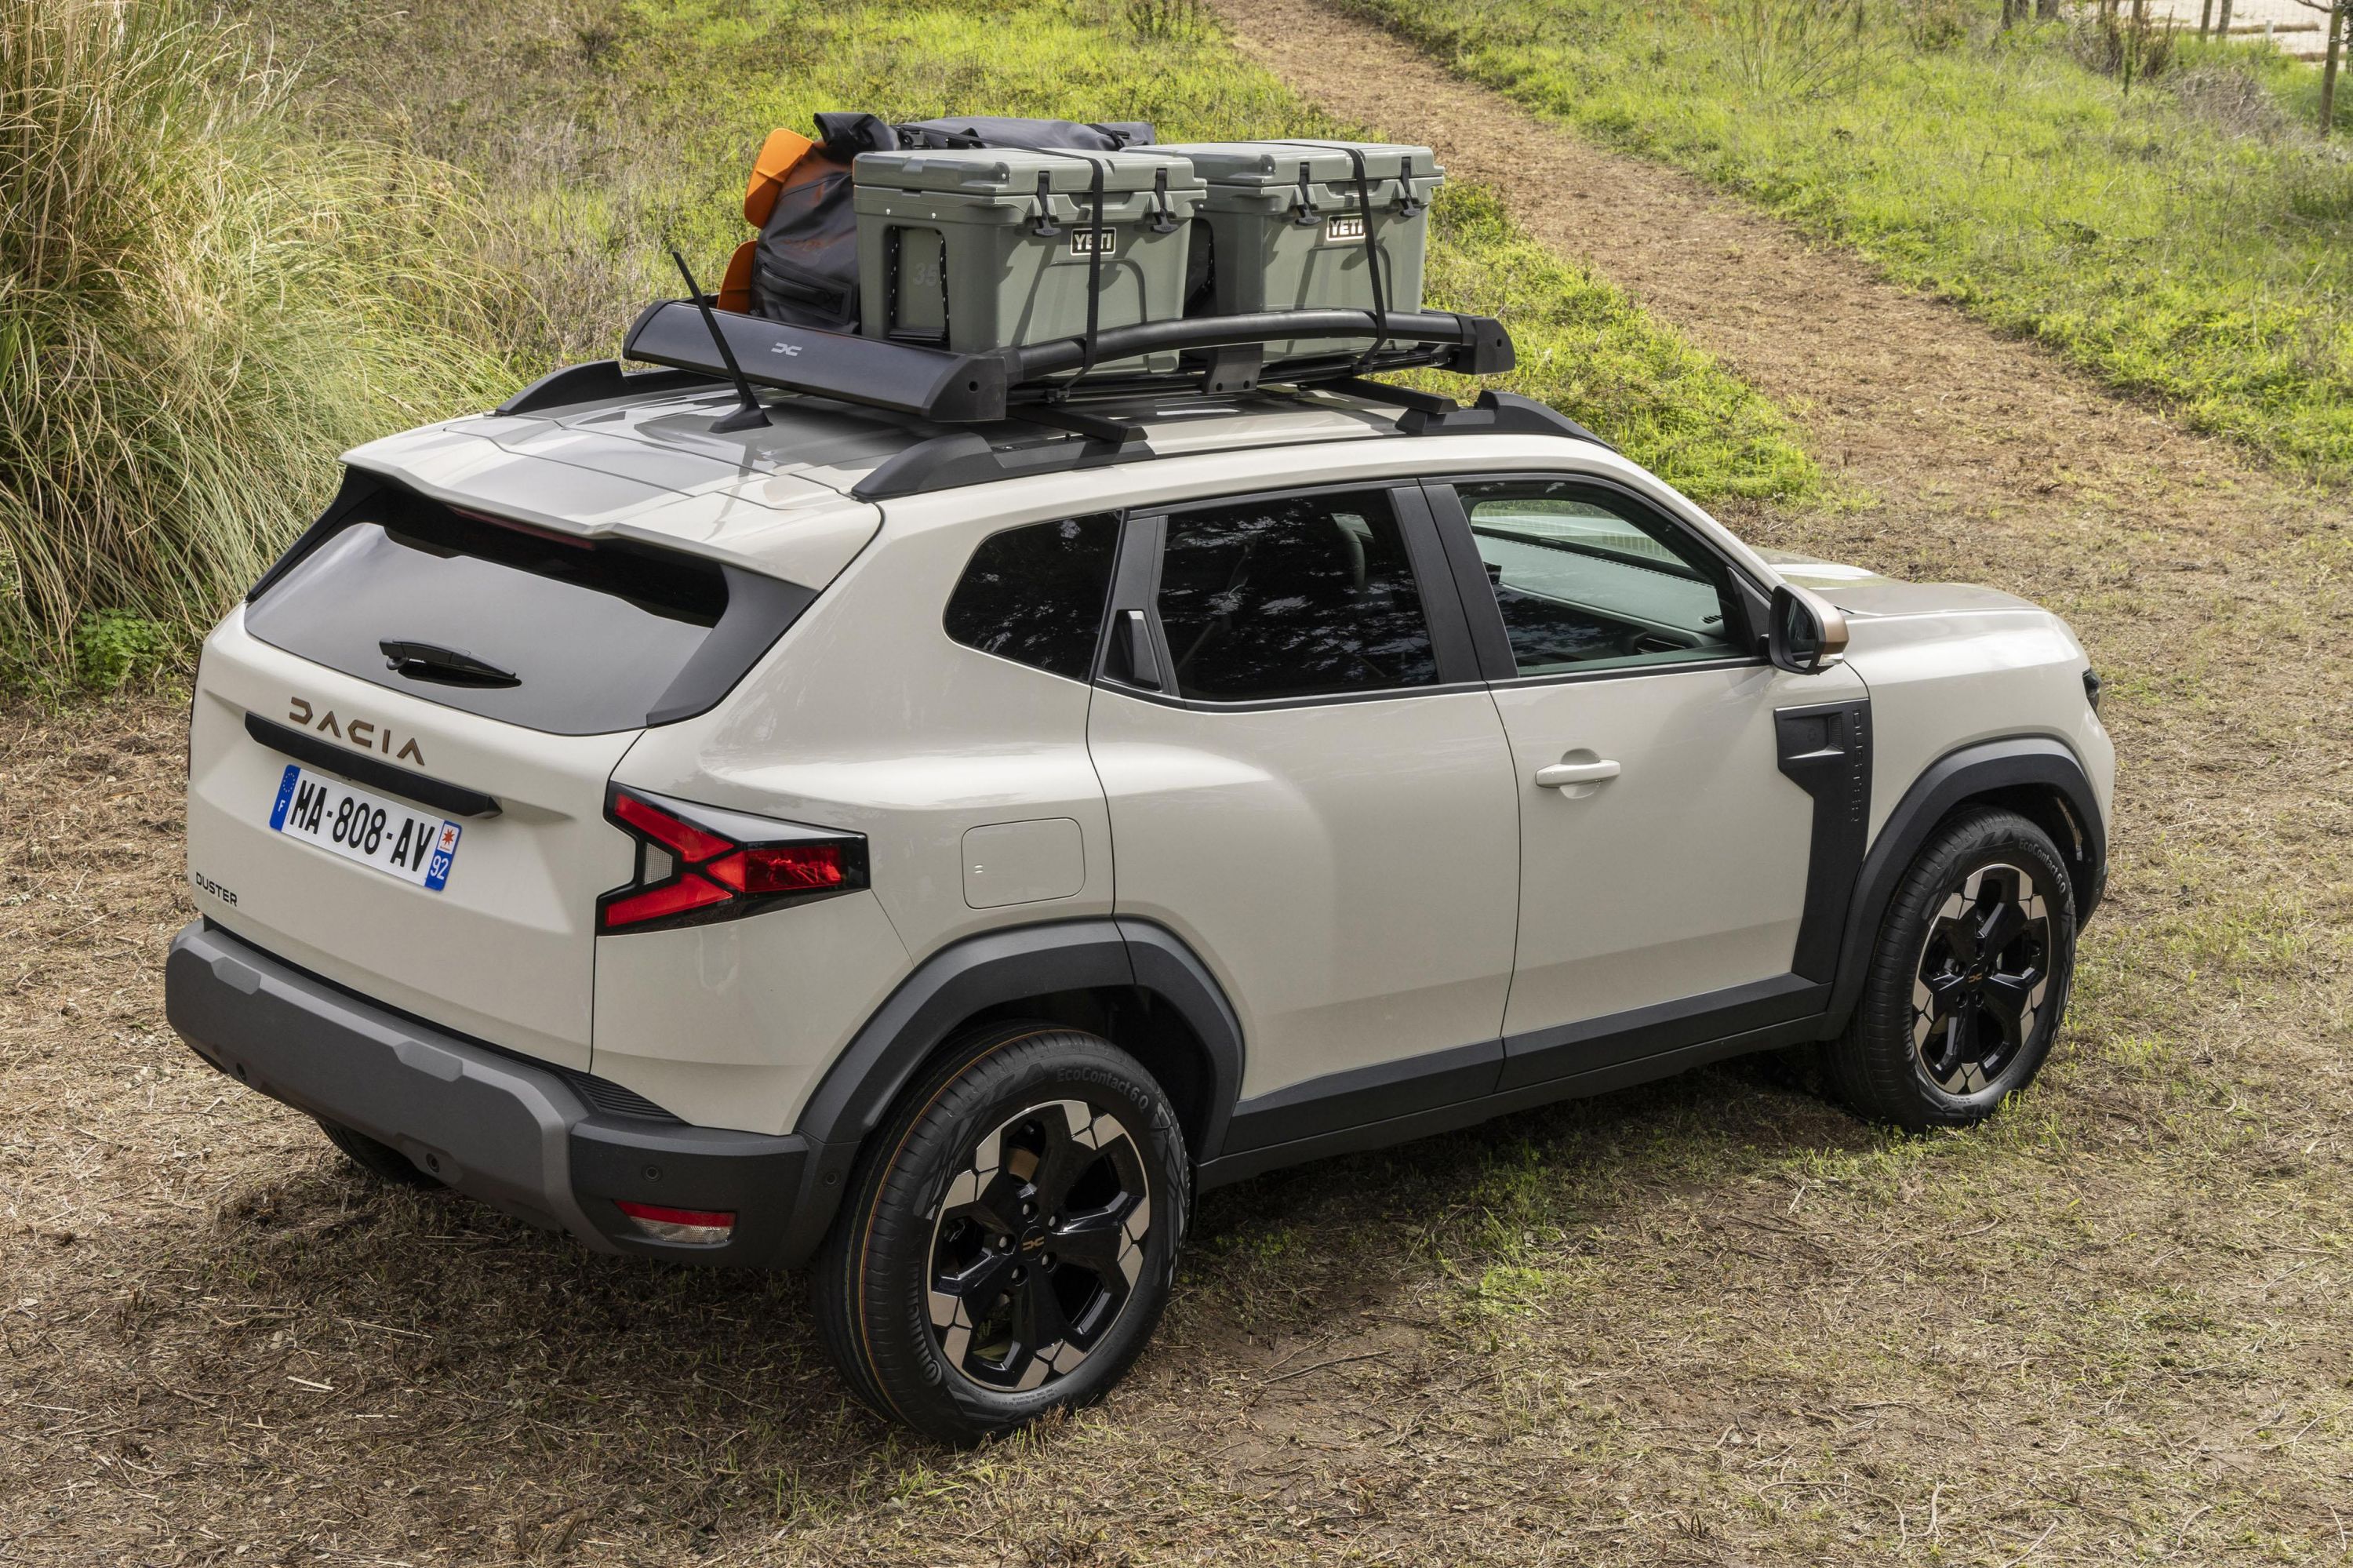 Dacia Duster moves to new platform and gains hybrid powertrain